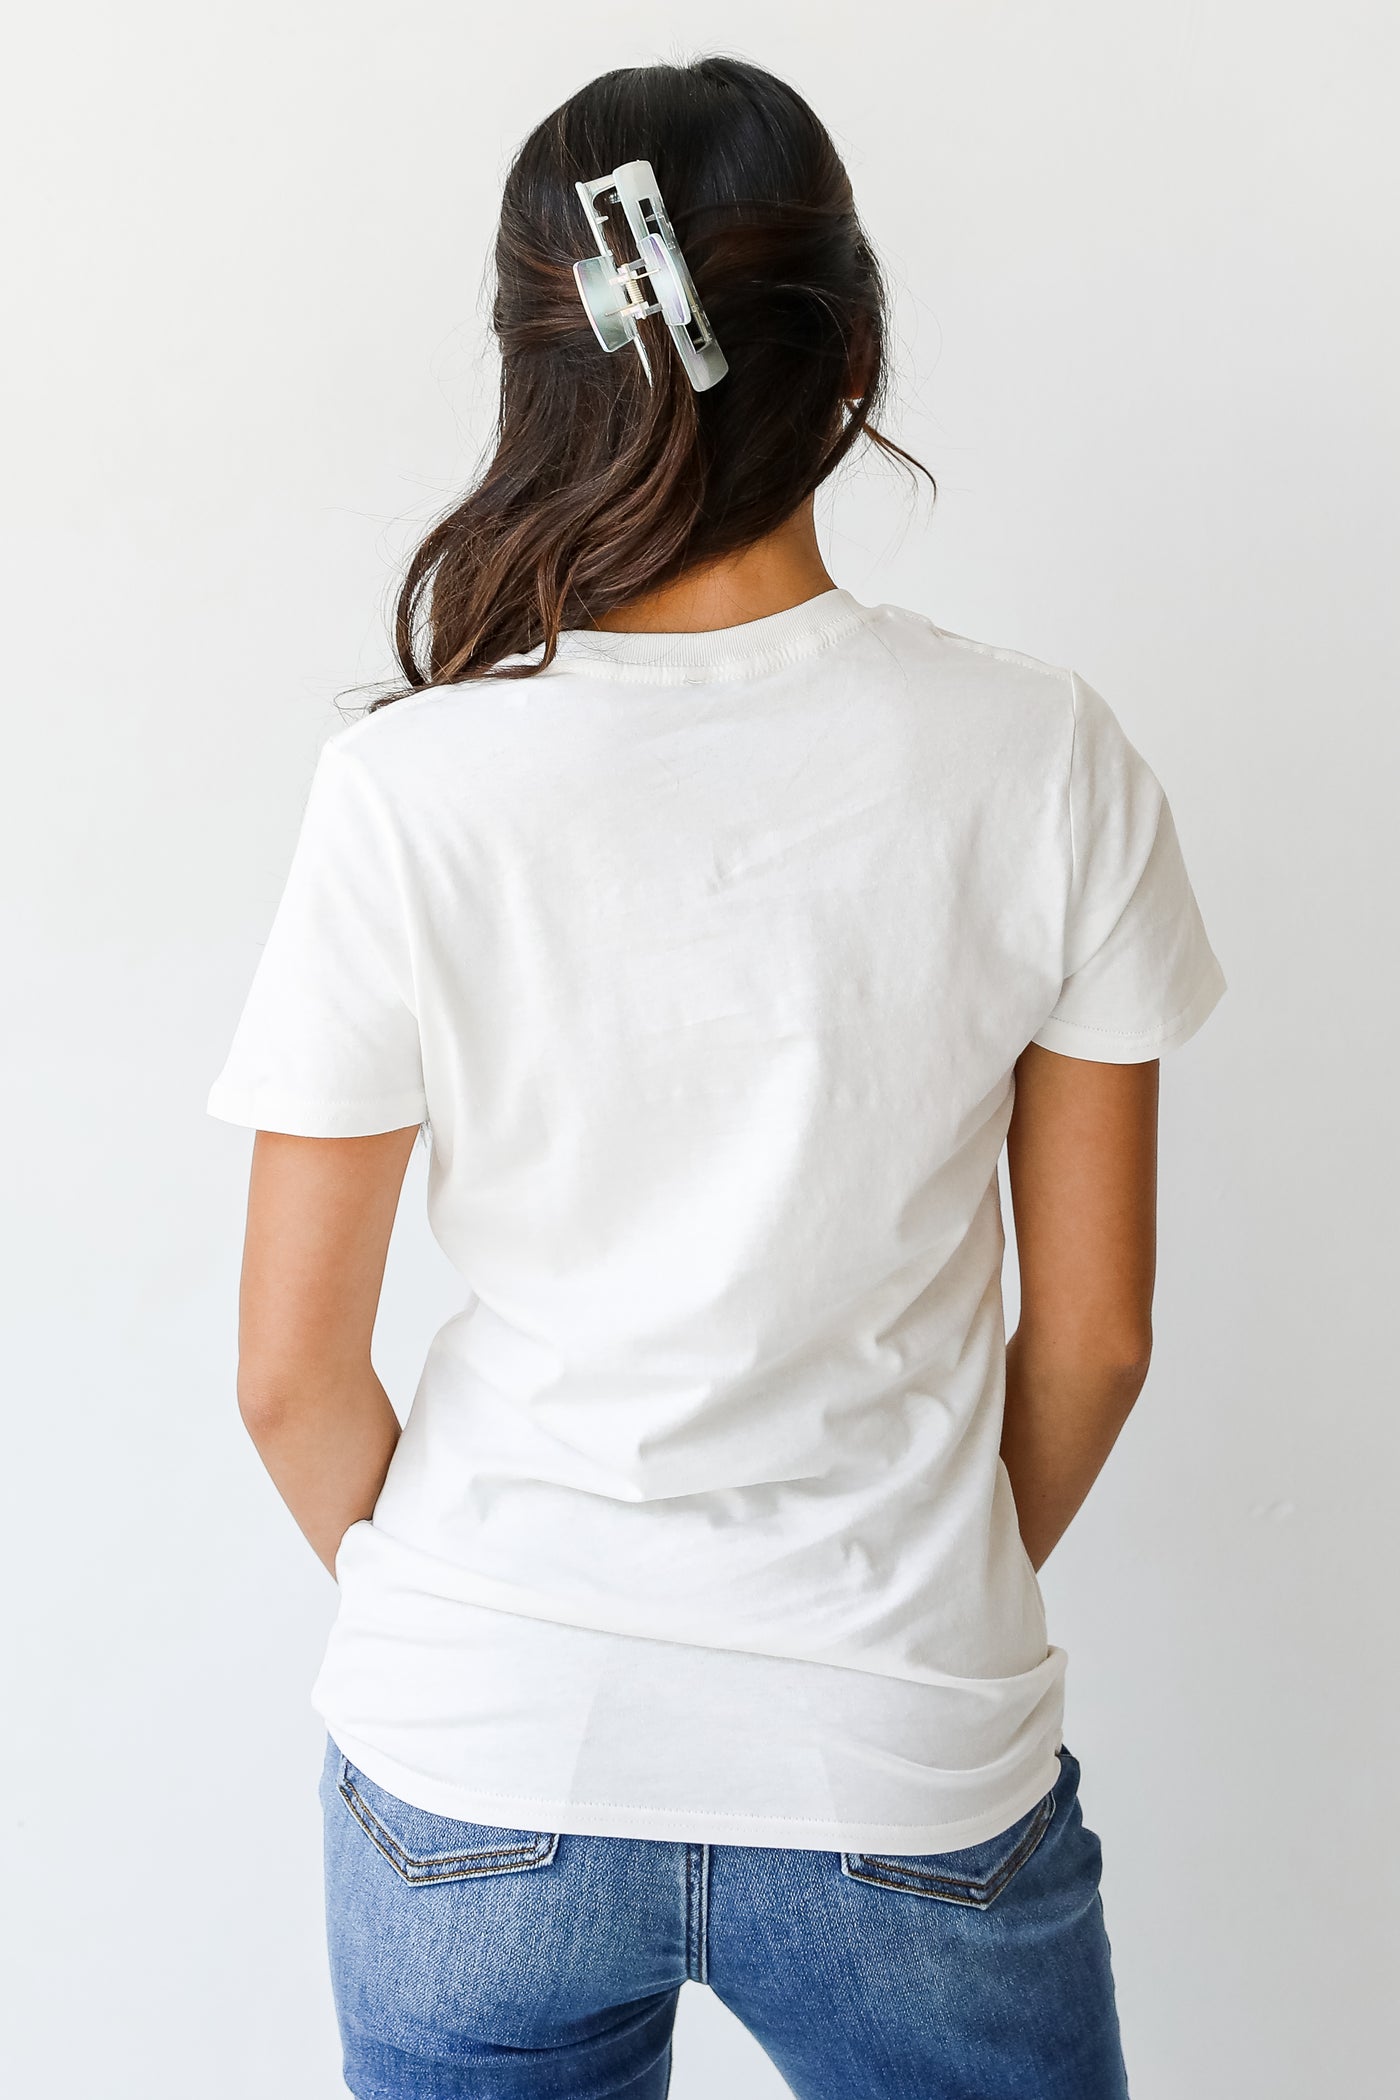 Raised On Dolly Tee back view